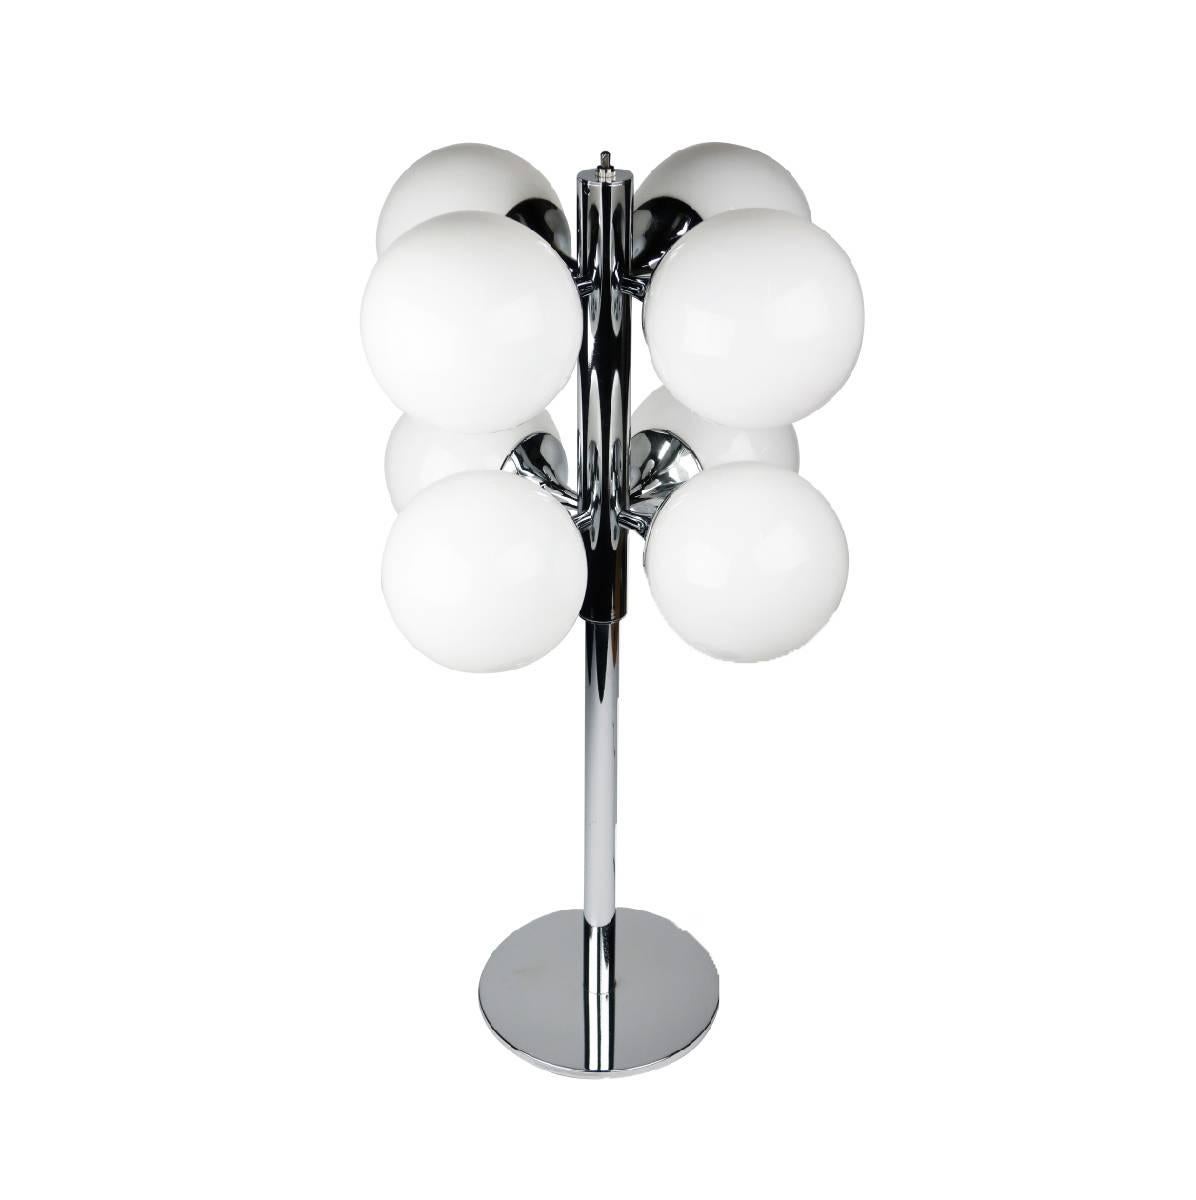 A striking chrome Robert Sonneman 1970s table lamp with eight frosted glass globes on chrome cylinders connected to a center chrome rod. New bulbs and power switch. In excellent vintage condition. 

Measure: 14.5” x 14.5” x 26.5”.